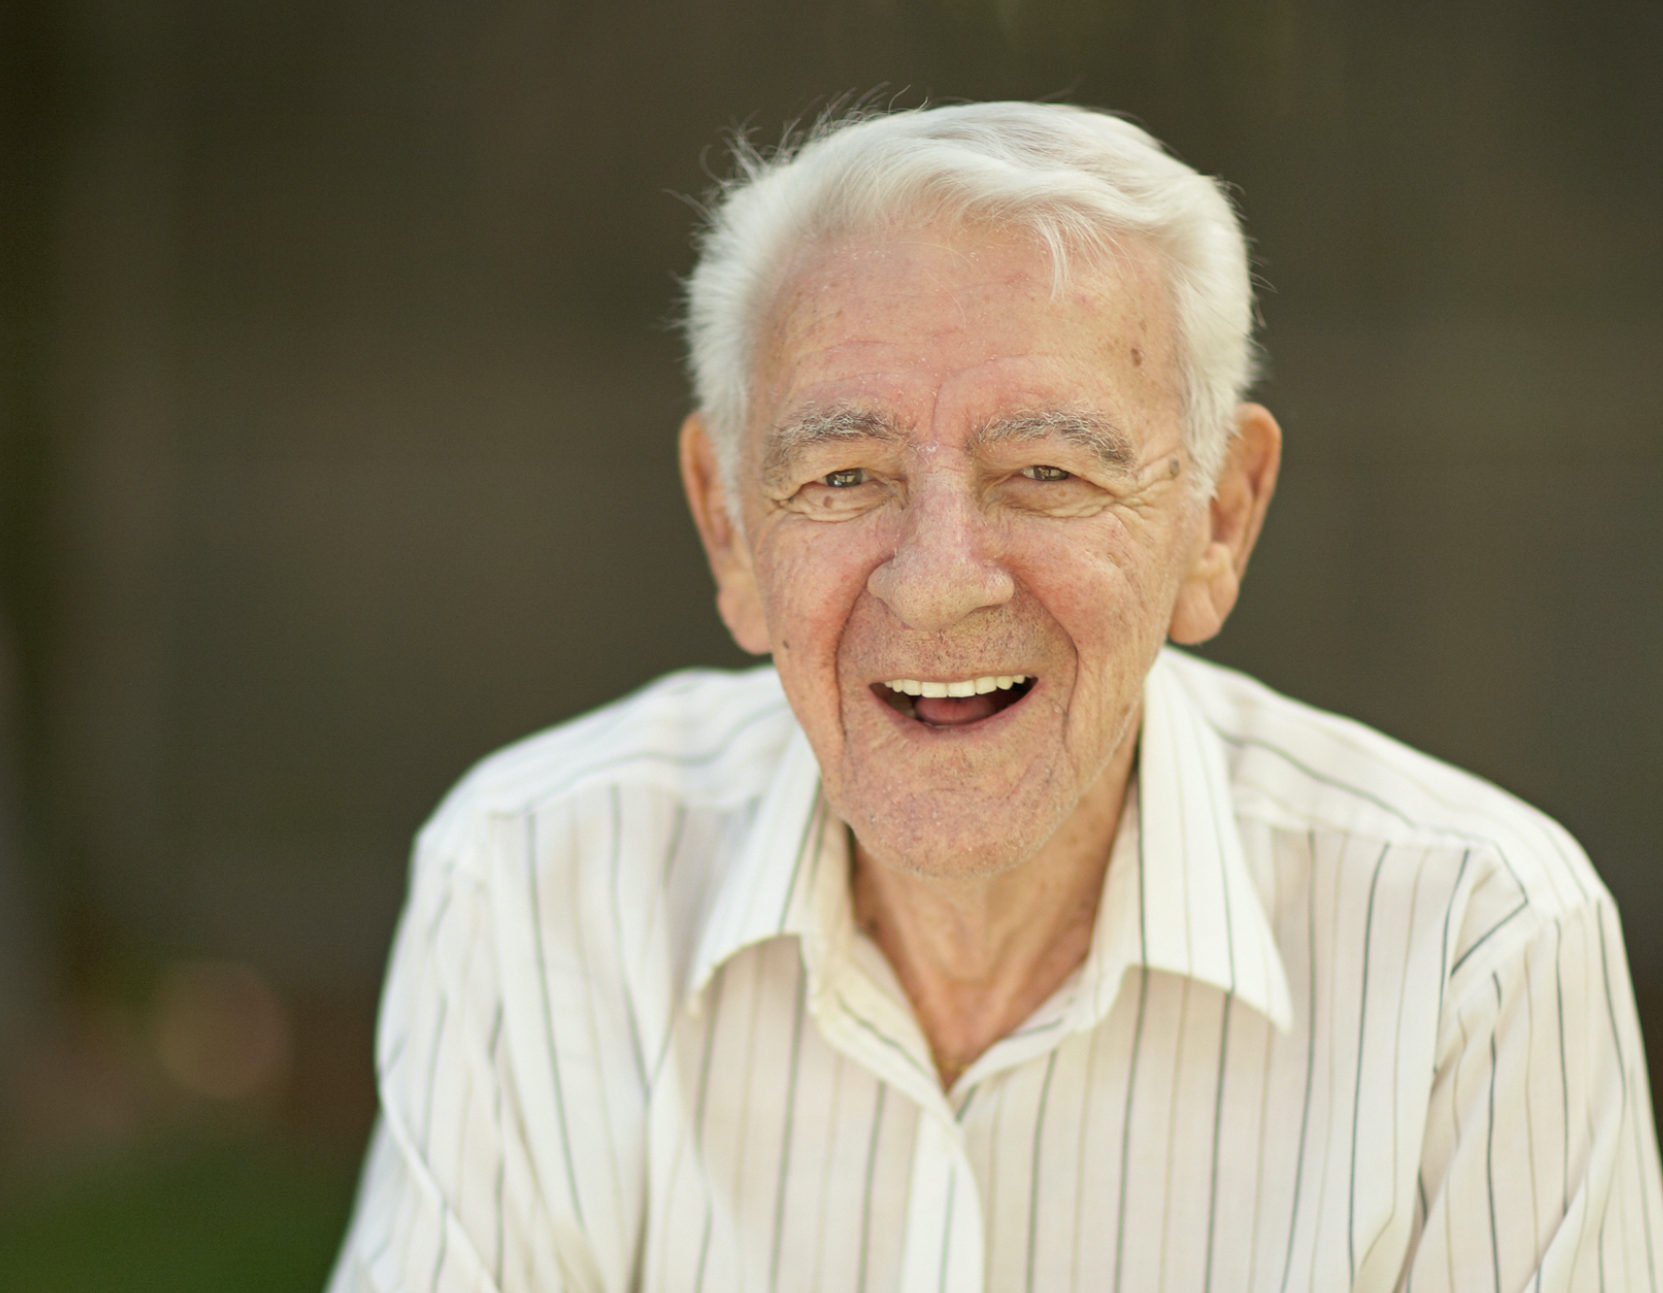 Oral Health for Older Adults: Quick tips 